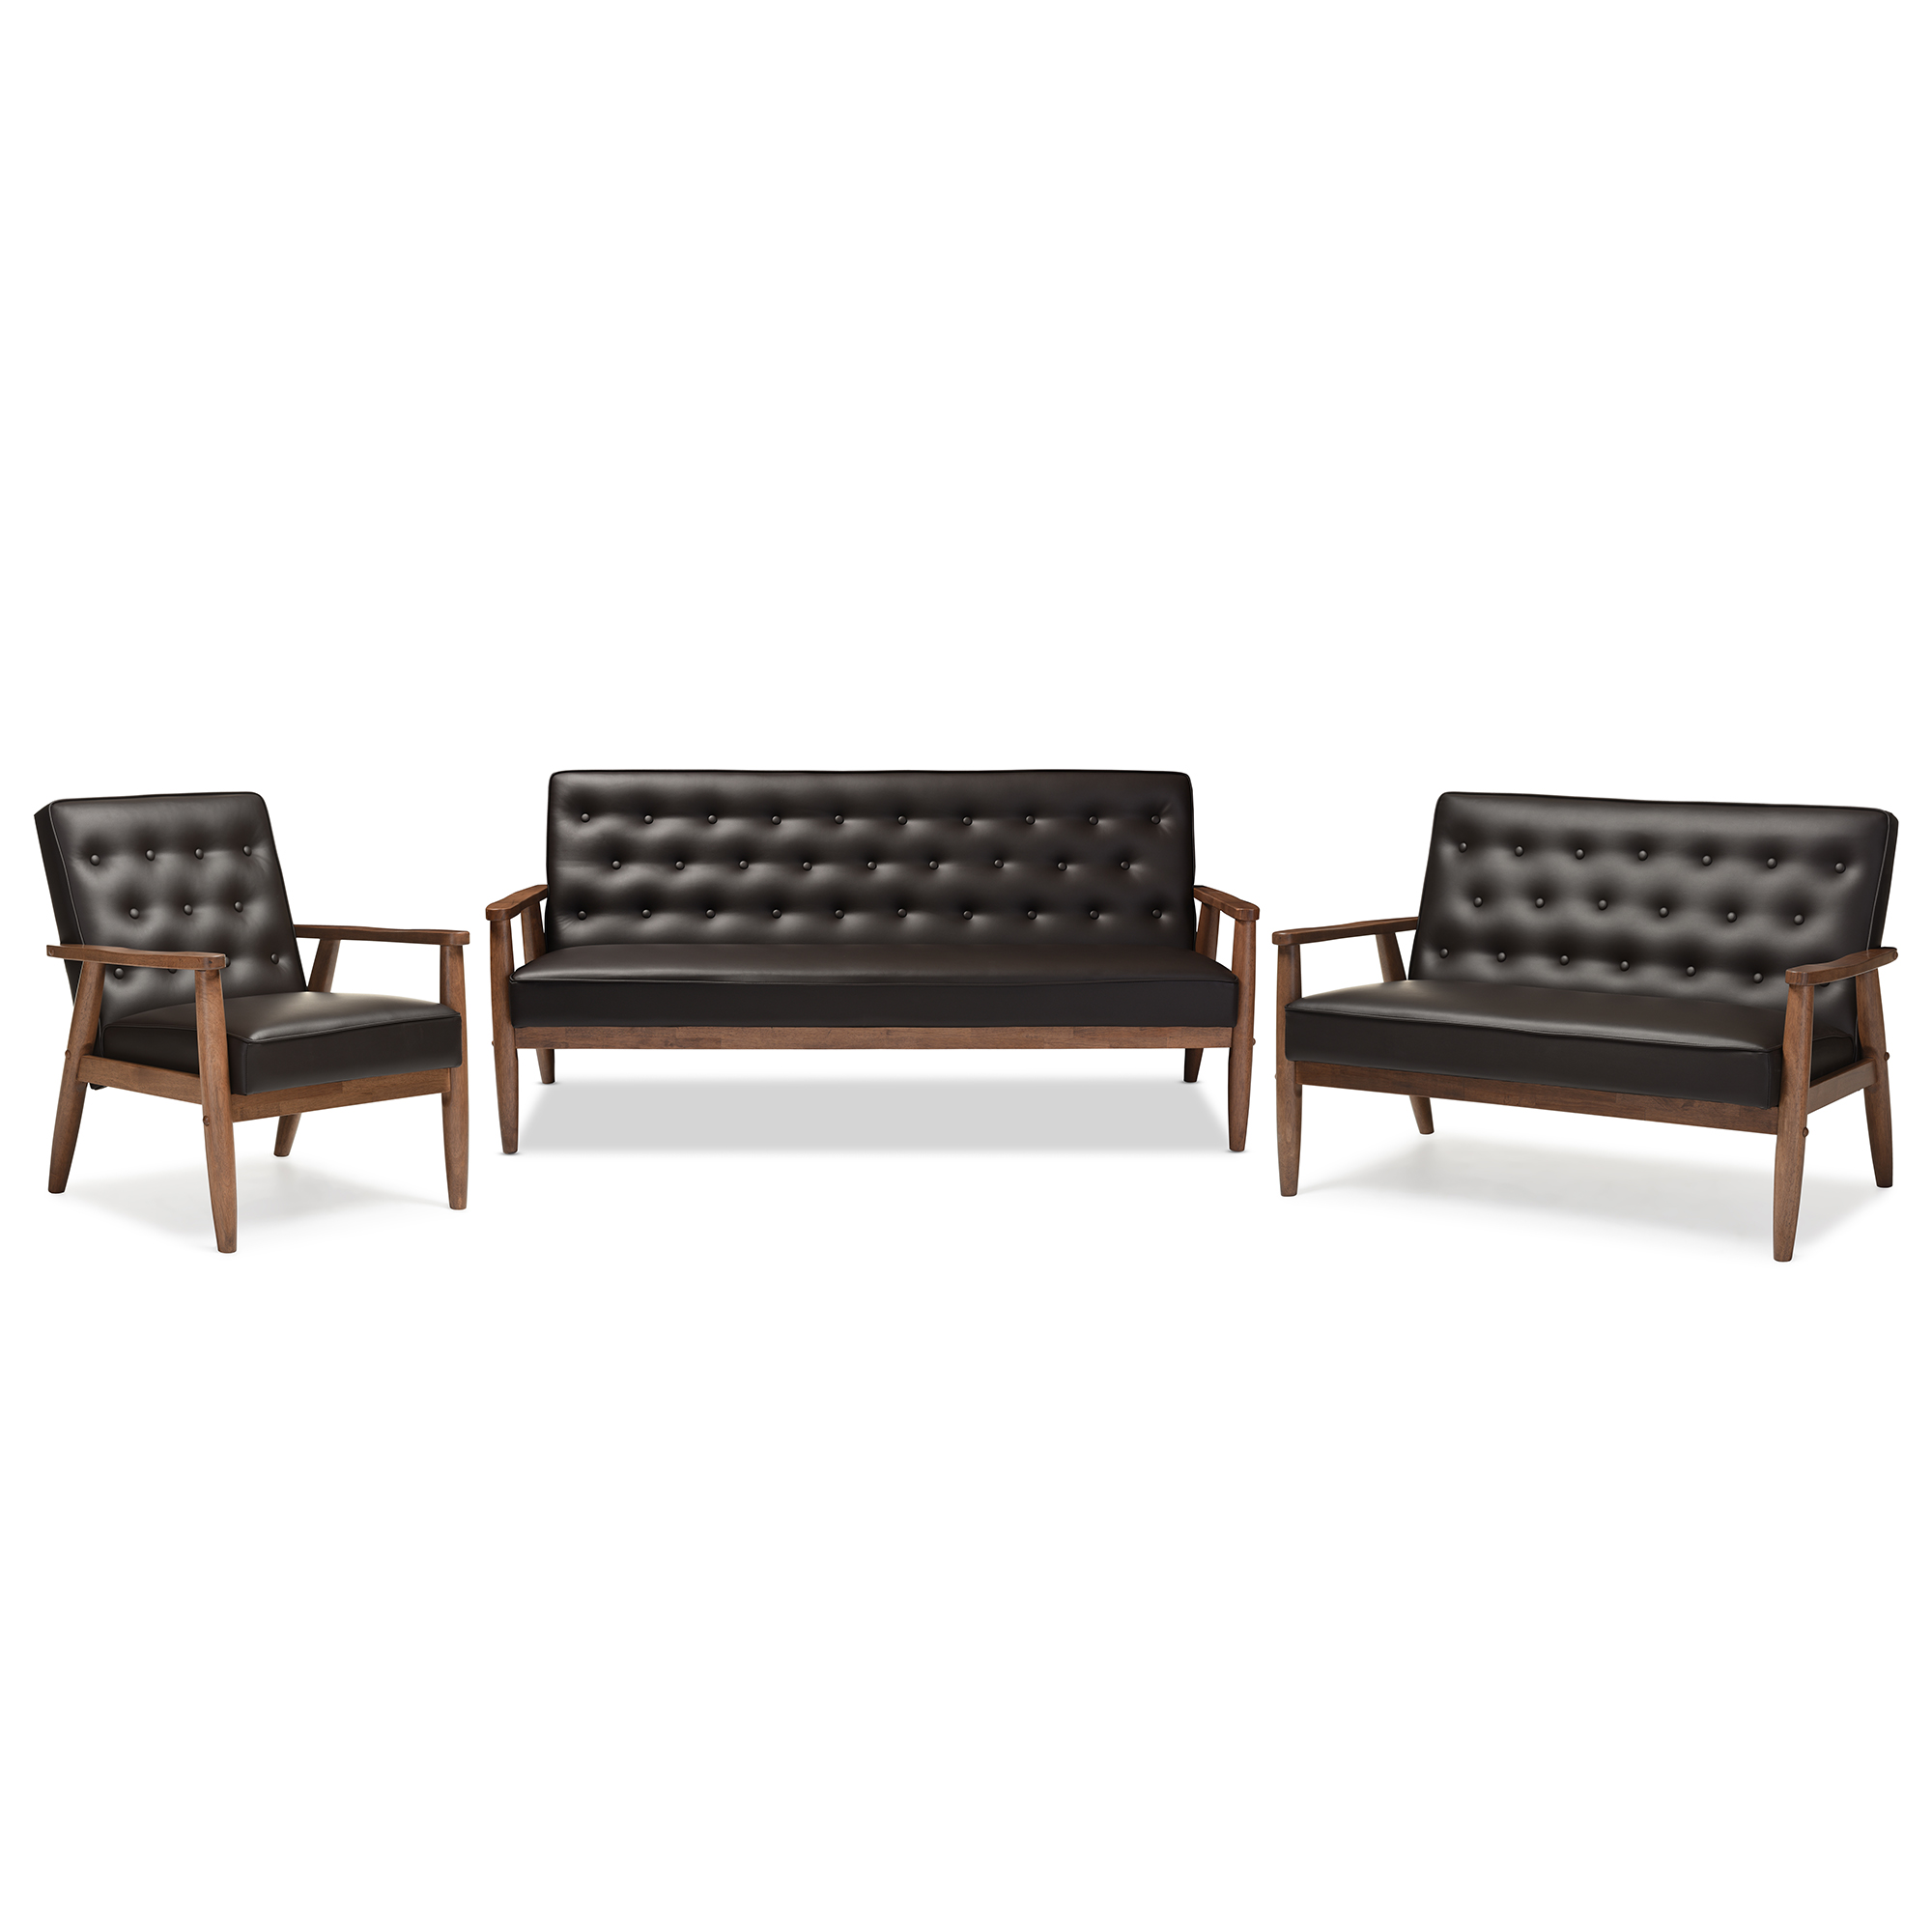 Baxton Studio Sorrento Mid-century Retro Modern Brown Faux Leather Upholstered Wooden 3 Piece Living room Set